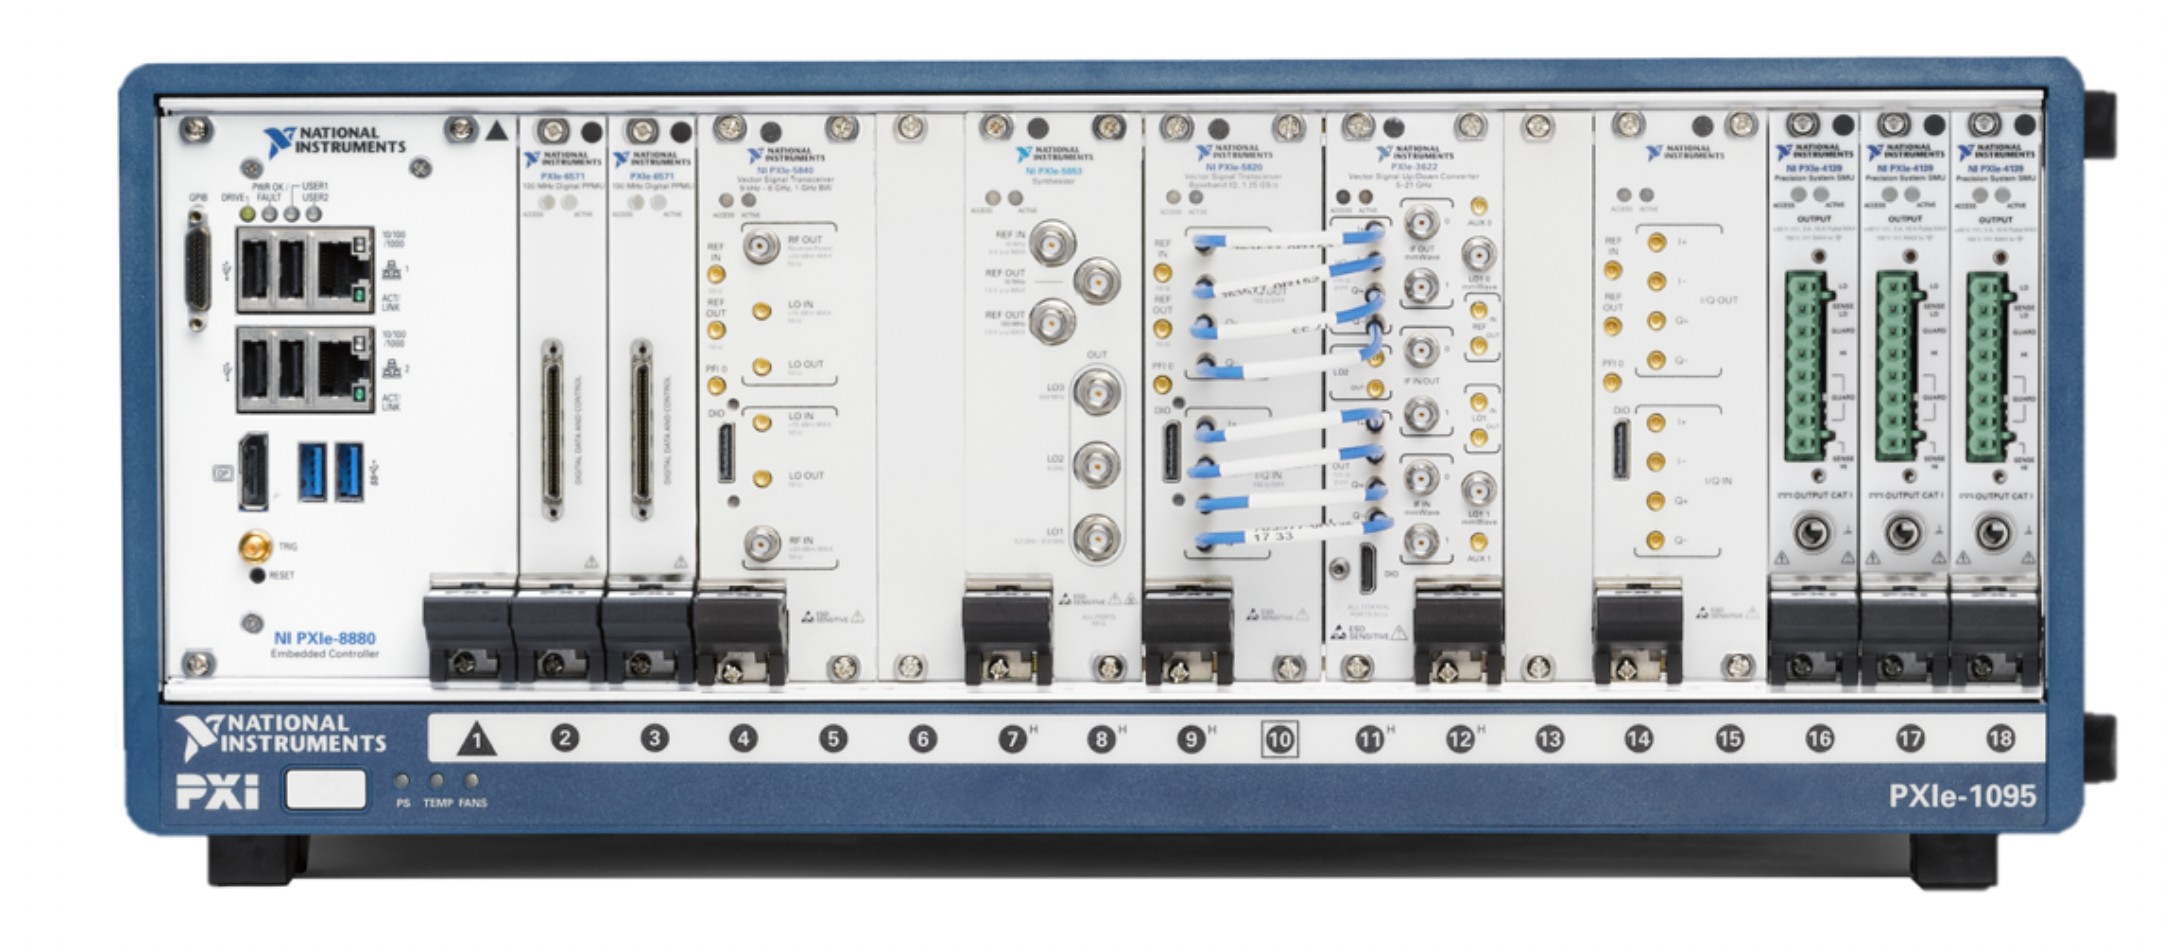 The mmWave VST shares the same foundational resources with any PXI instrument from NI to streamline test program creation, simplify triggering and synchronization, and maximize measurement speed.